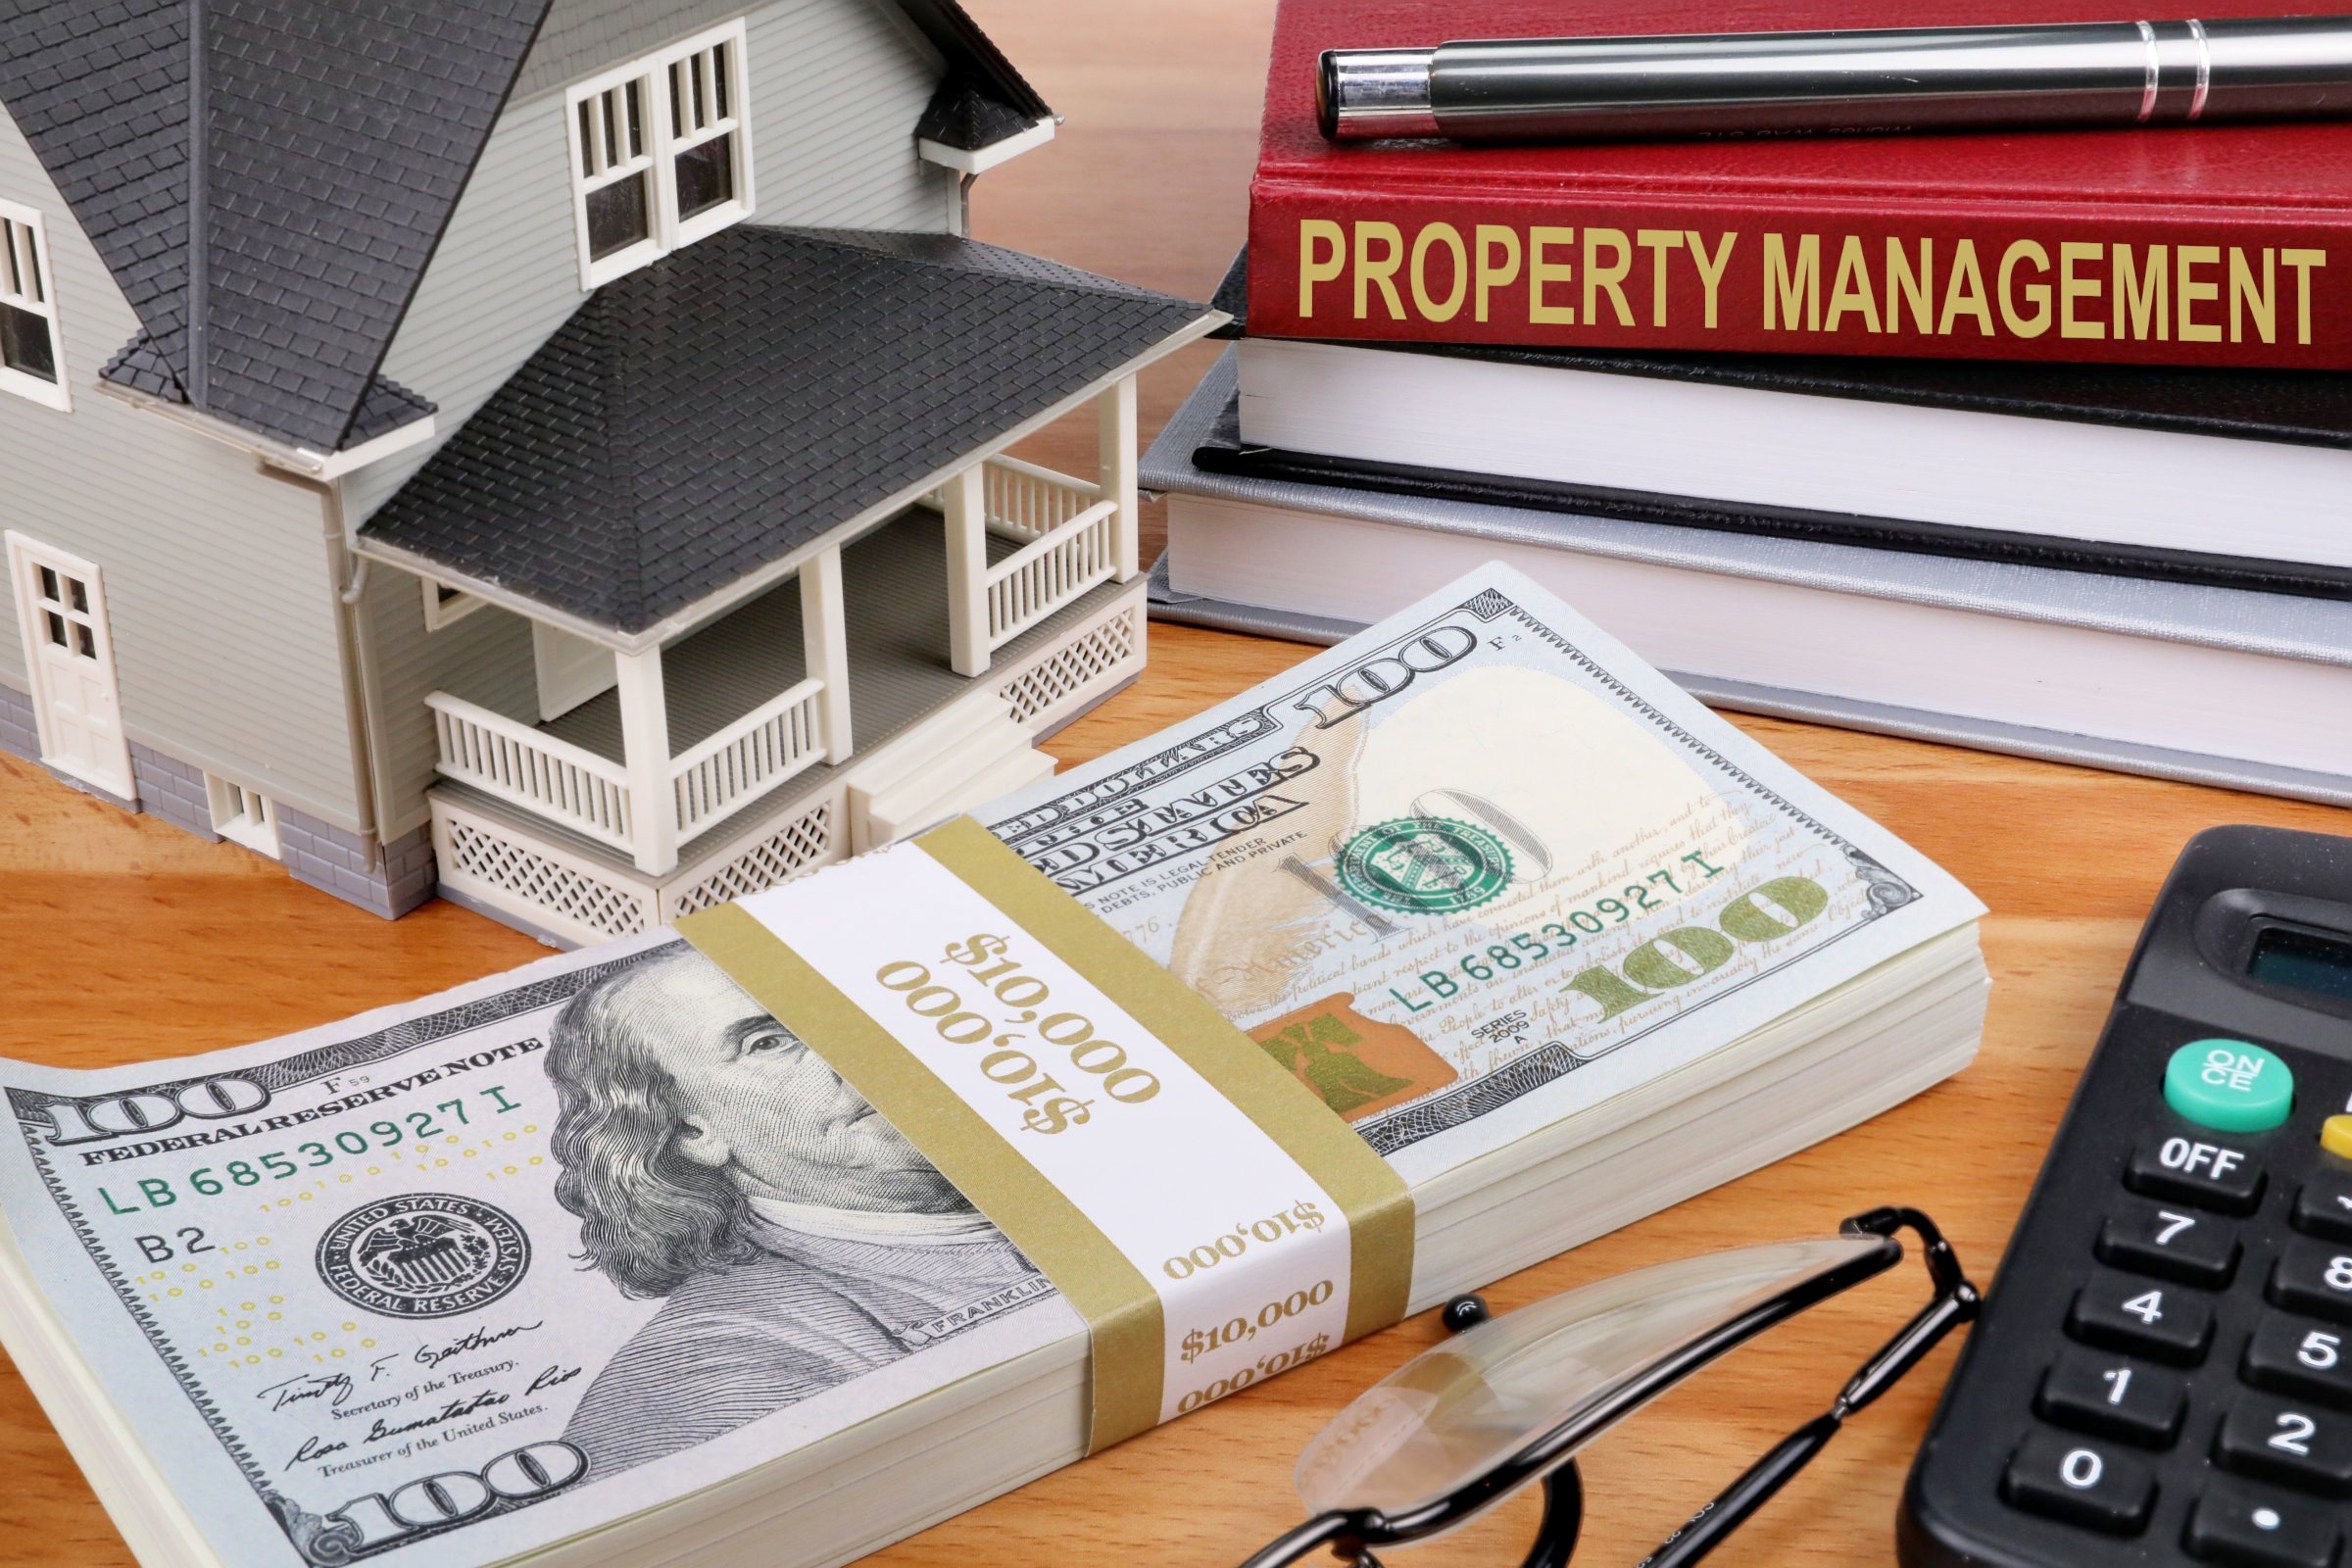 image - What Are The 4 Main Things About Property Management